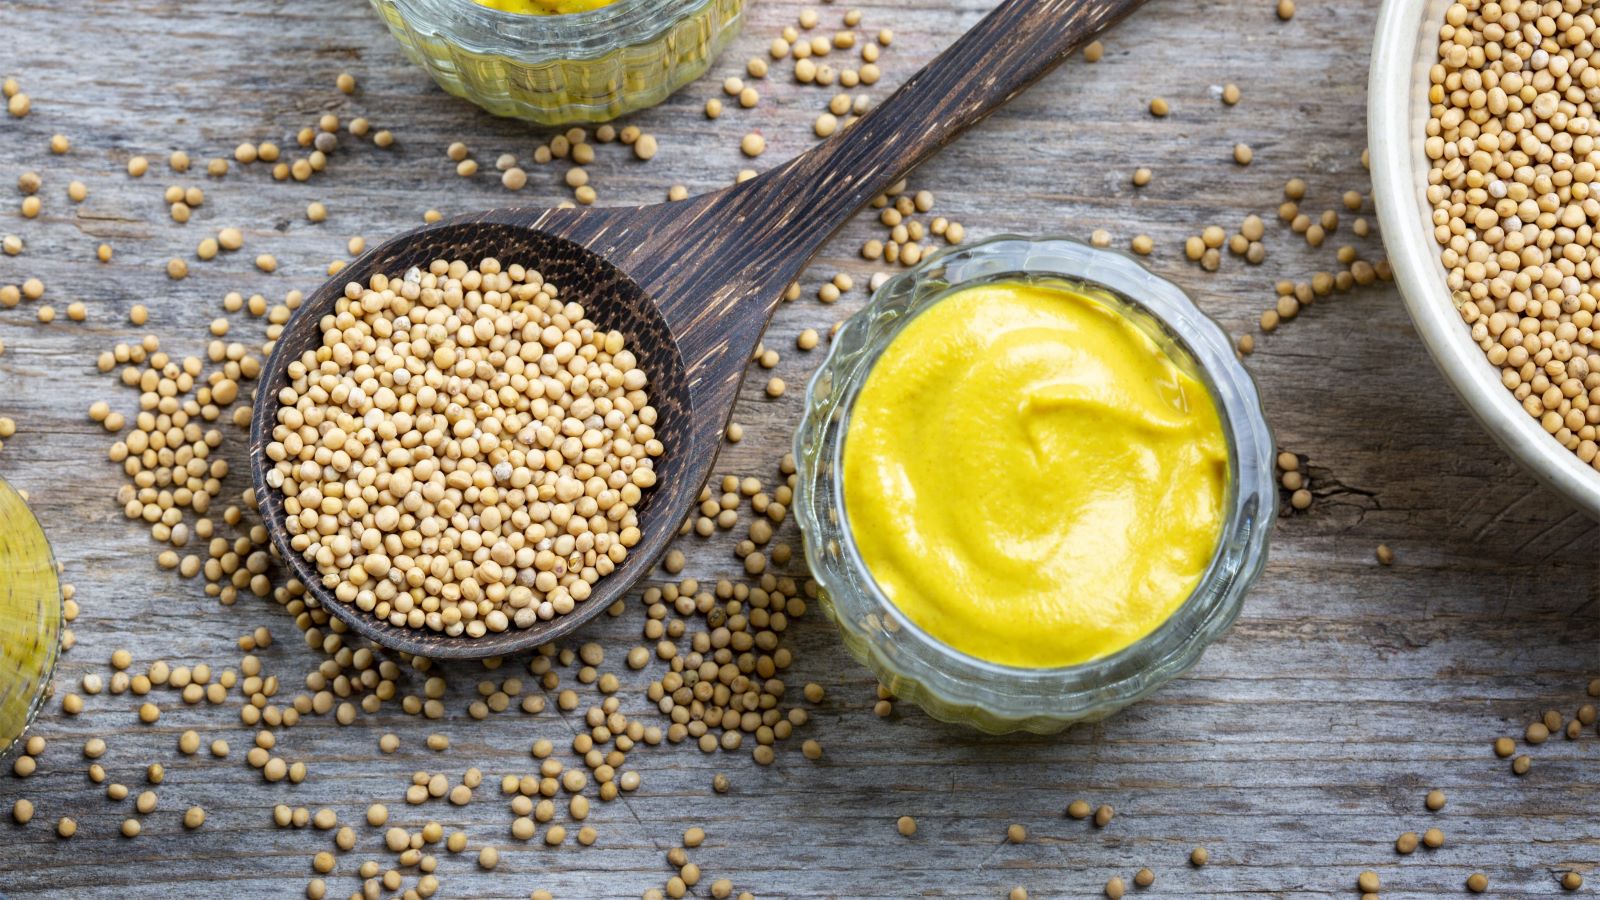 Some people say a spoonful of mustard eases heartburn. But if you have acid reflux several times a week, you’ll need something more.